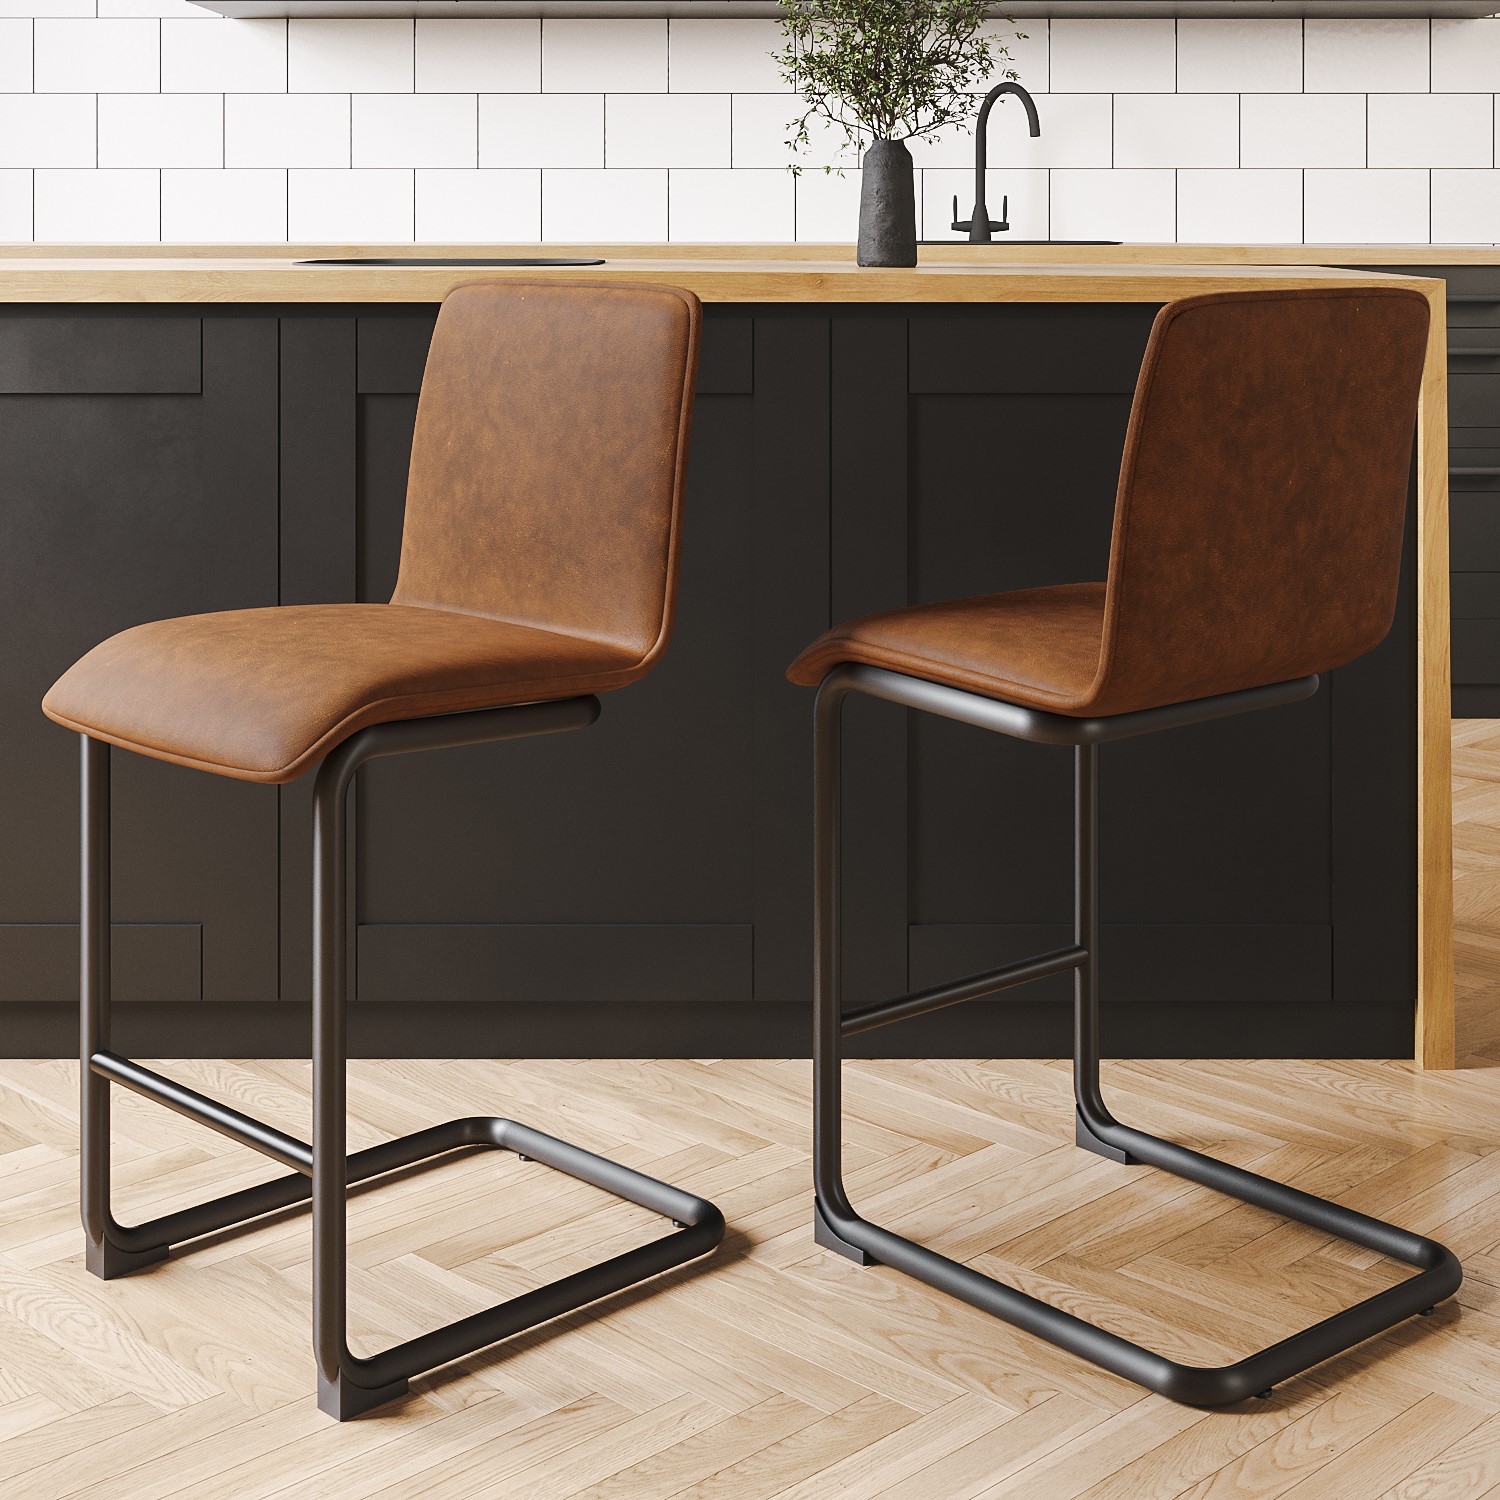 Photo of Set of 2 tan faux leather cantilever kitchen stools - lucas